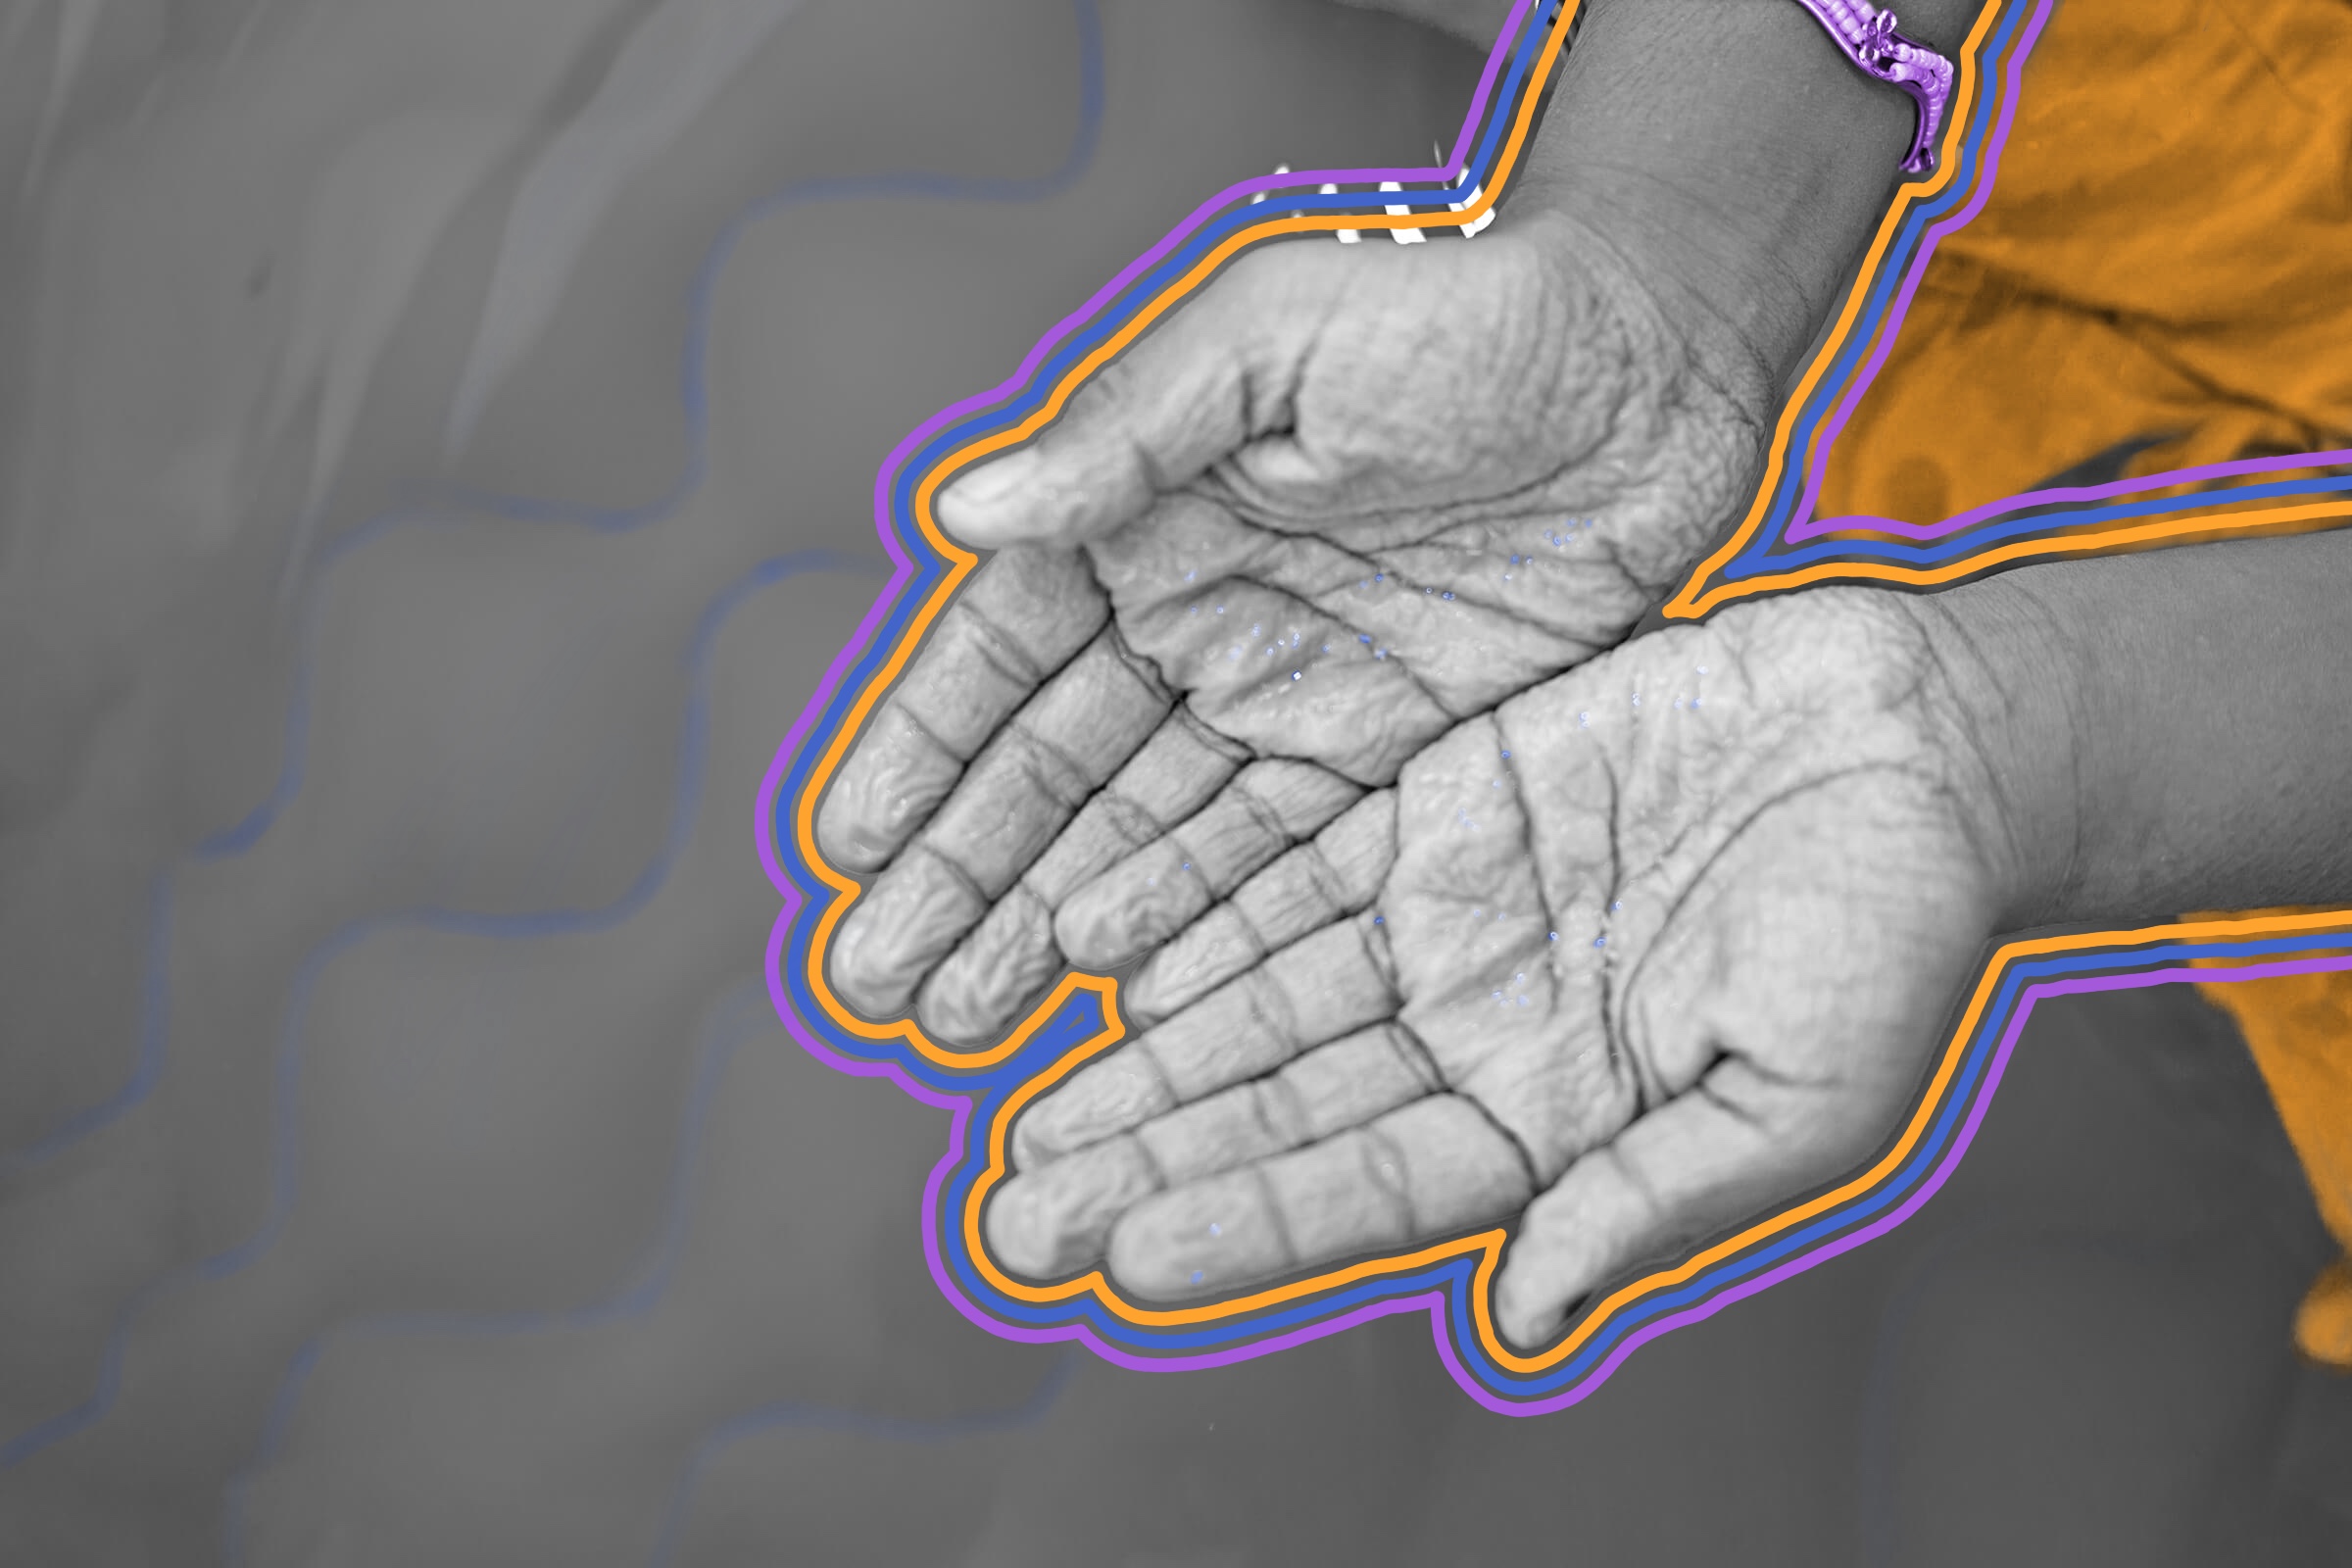 Humans may have evolved fingers and toes that wrinkle in water to help them grip wet objects.